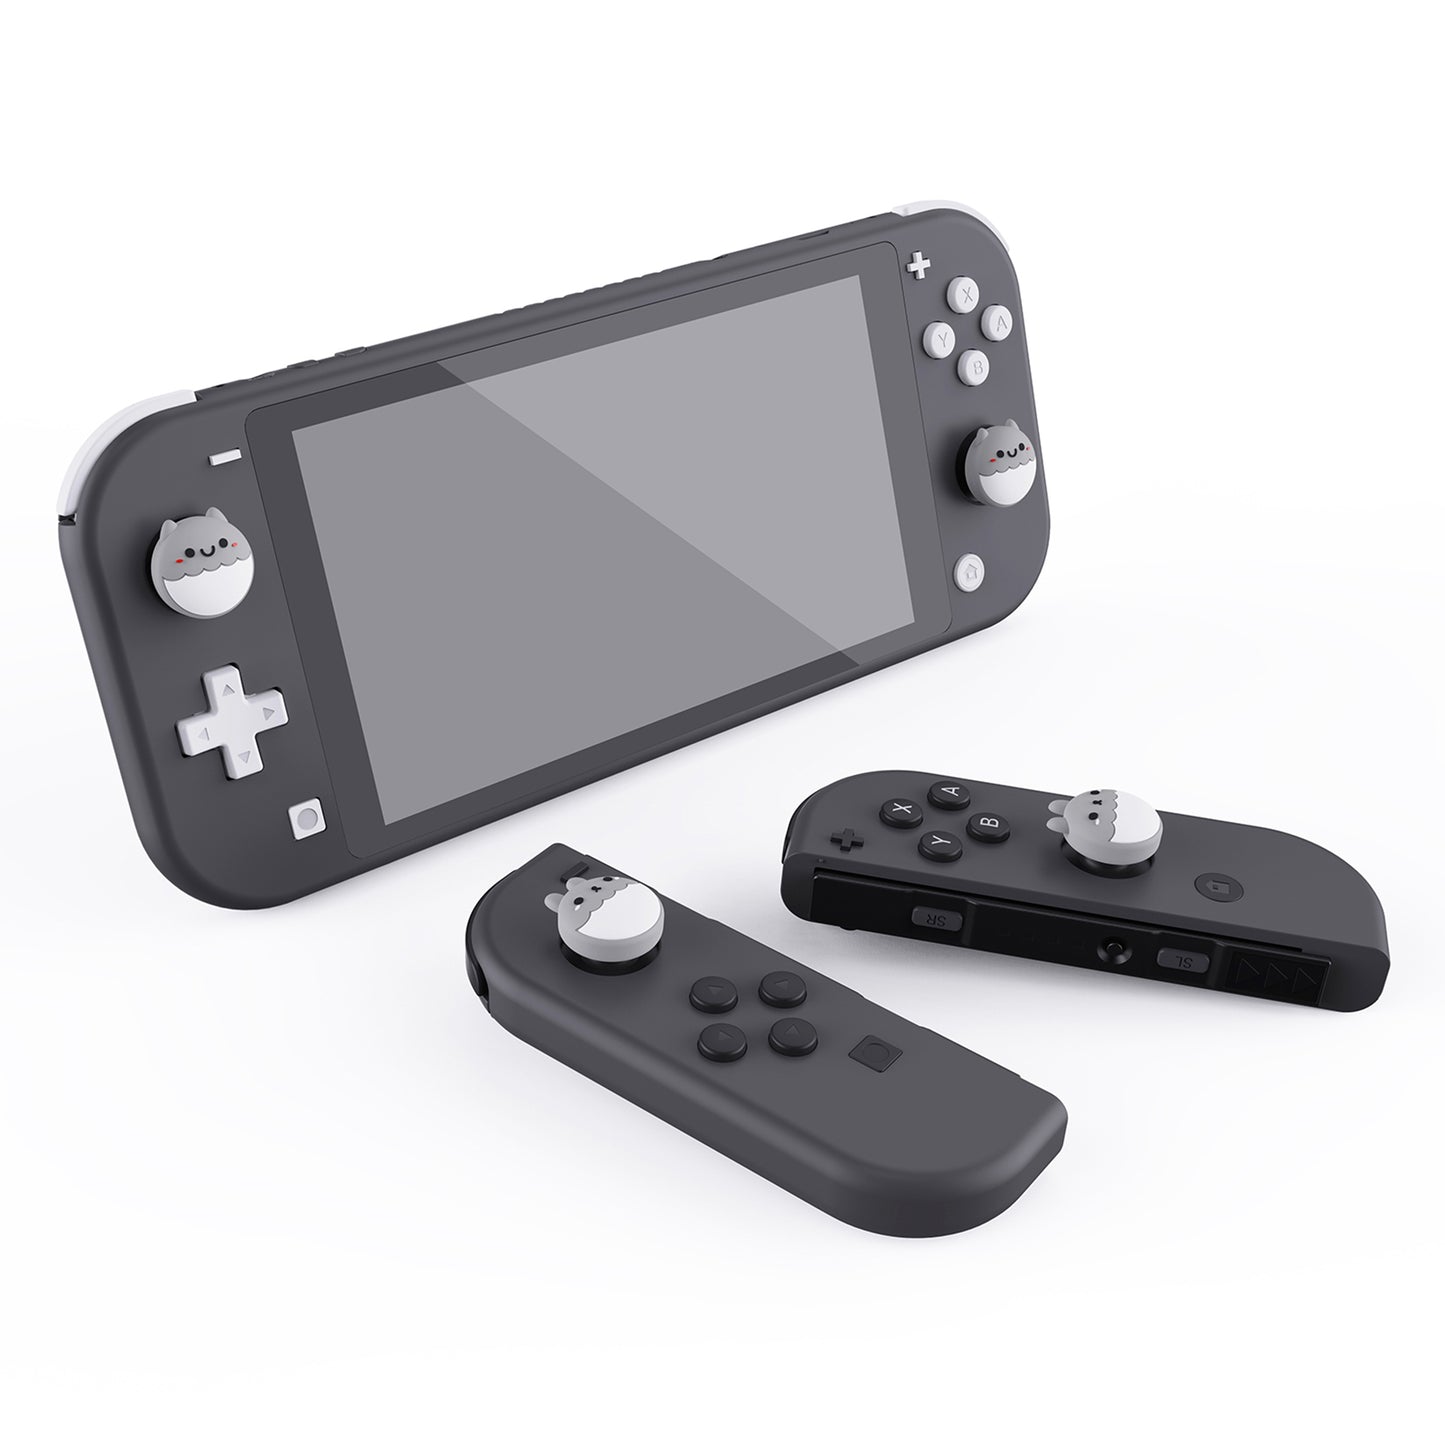 PlayVital Rabbit & Squirrel Cute Thumb Grip Caps for Nintendo Switch, Joystick Caps for Nintendo Switch Lite, Analog Cover Thumbstick Grips for OLED Joycon - Light Gray - NJM1124 playvital